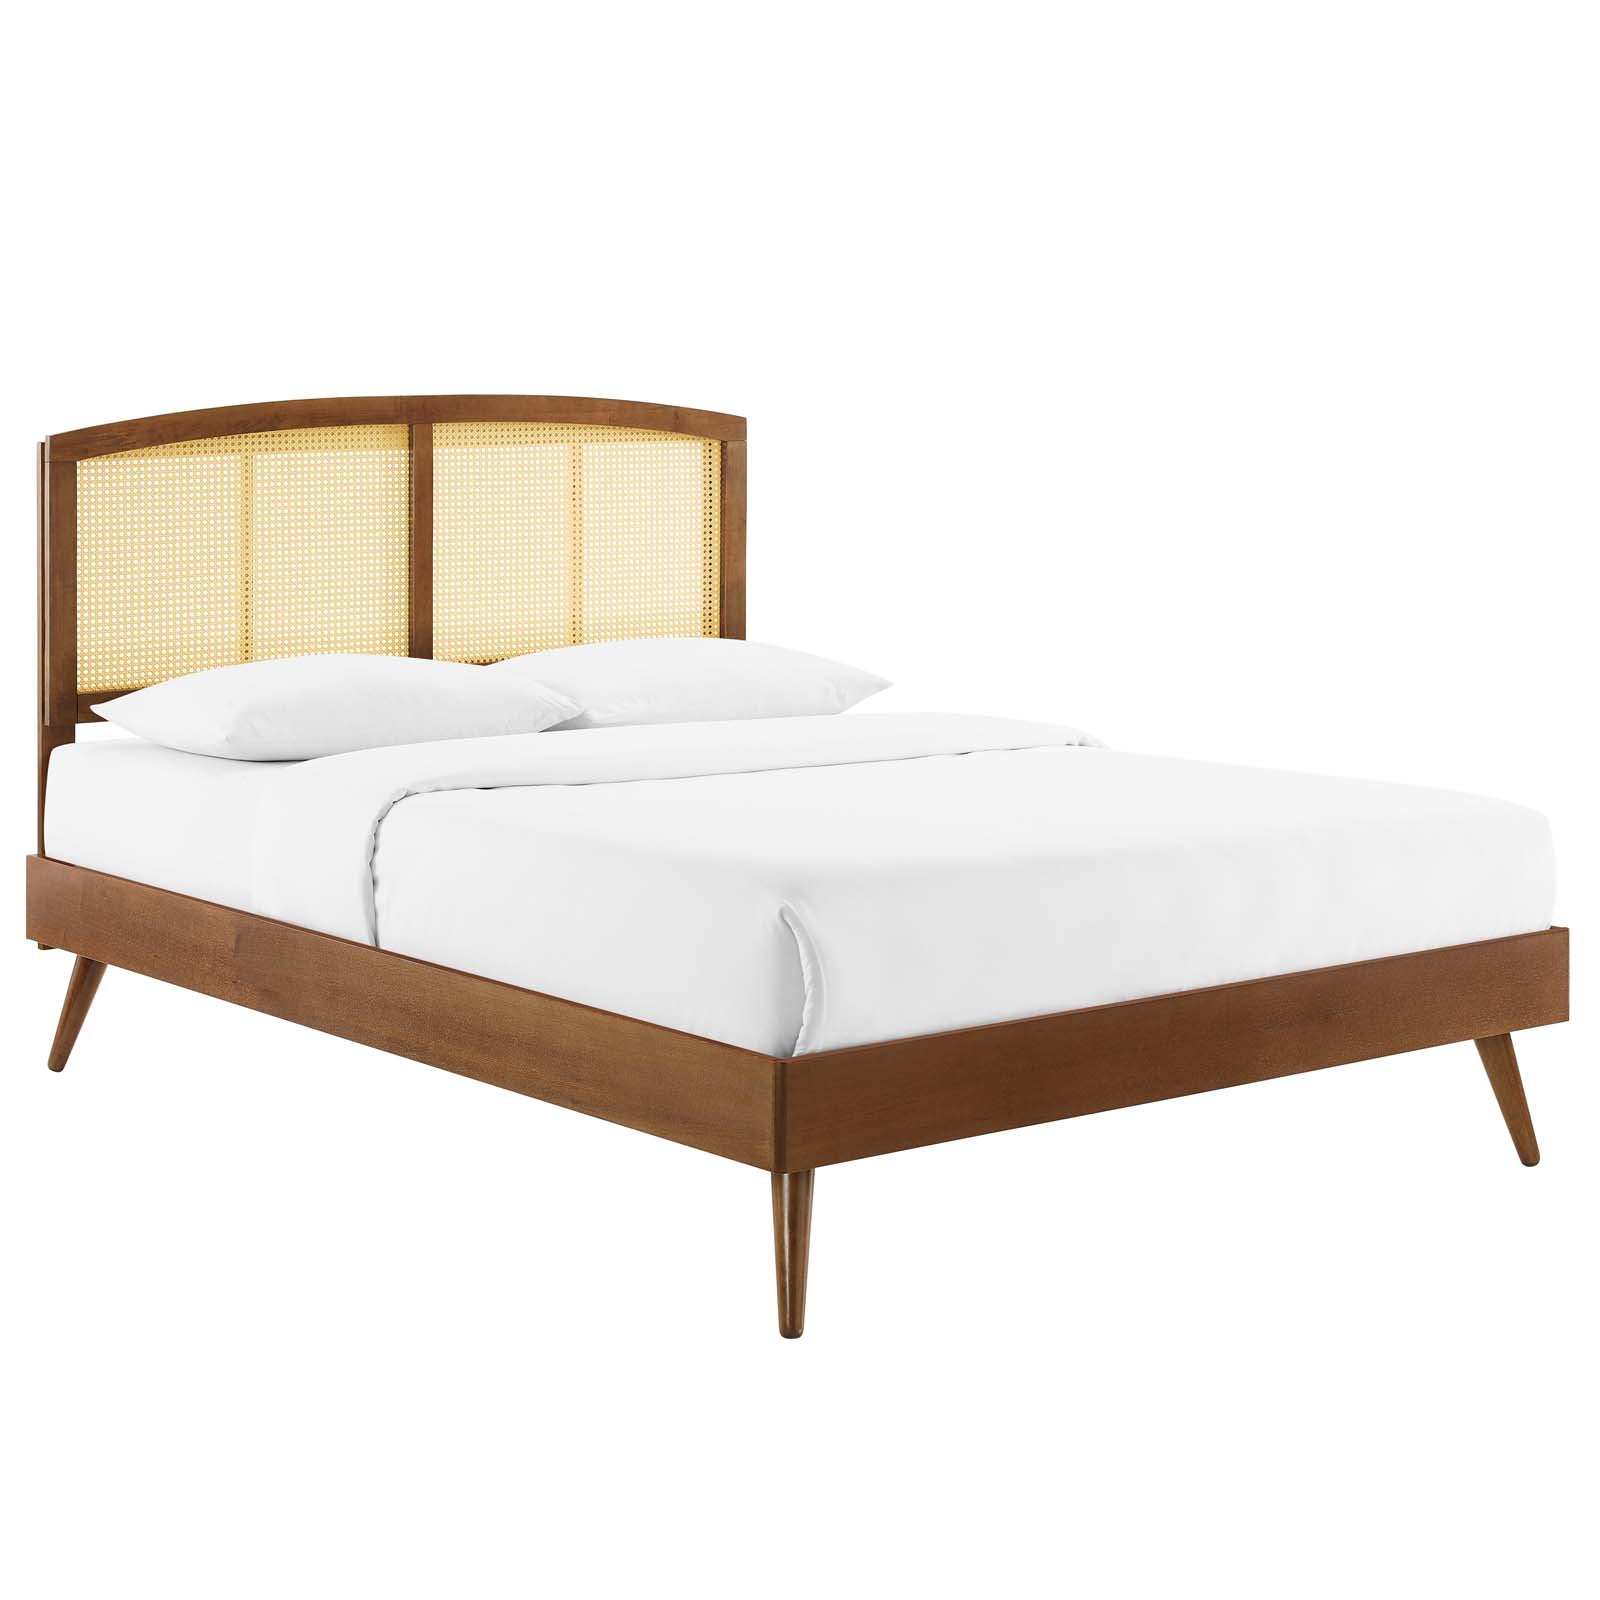 Modway Beds - Sierra-Cane-and-Wood-King-Platform-Bed-With-Splayed-Legs-Walnut